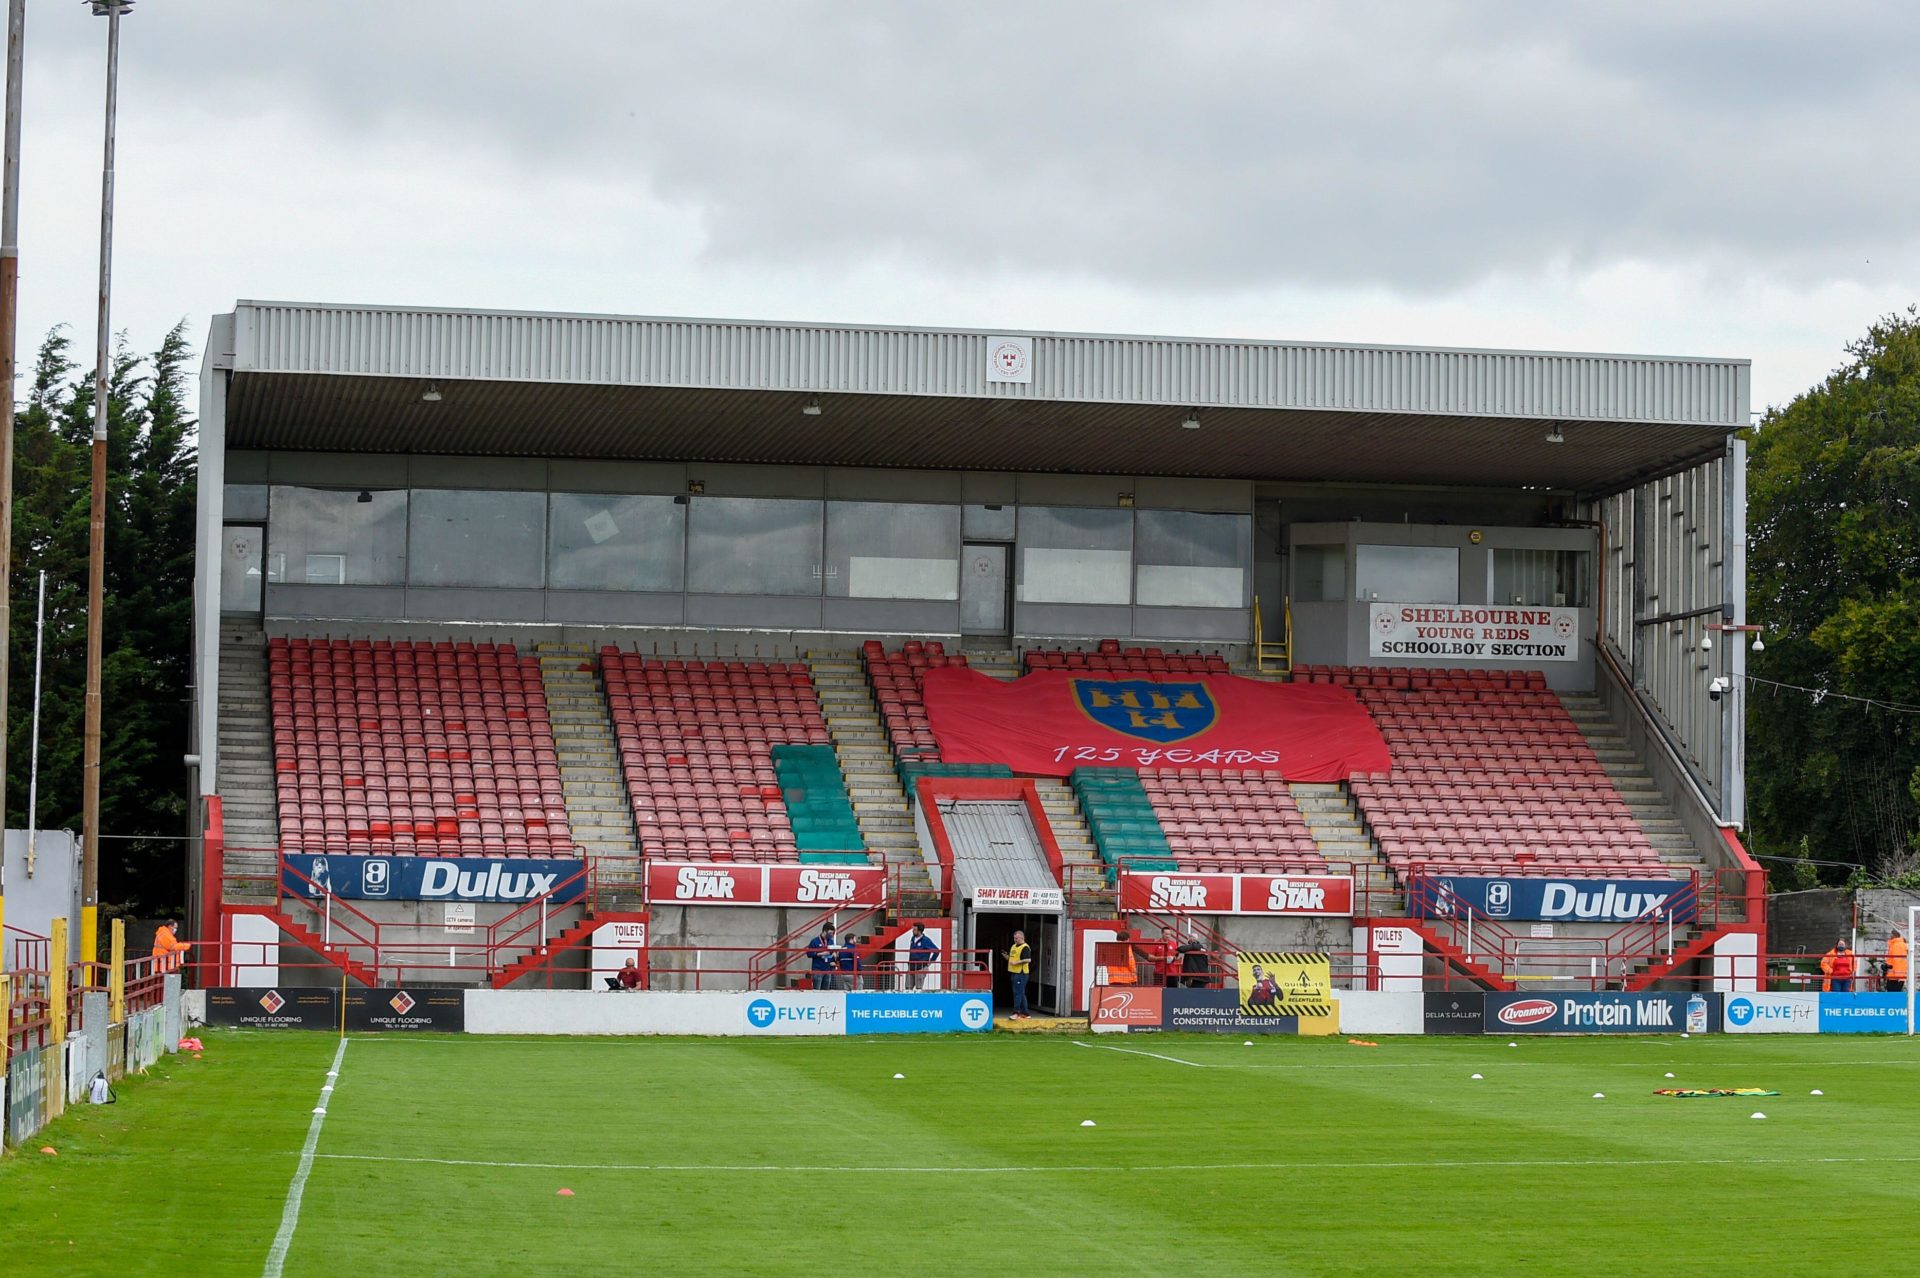 ‘People power’ credited with securing 250-year lease for Tolka Park